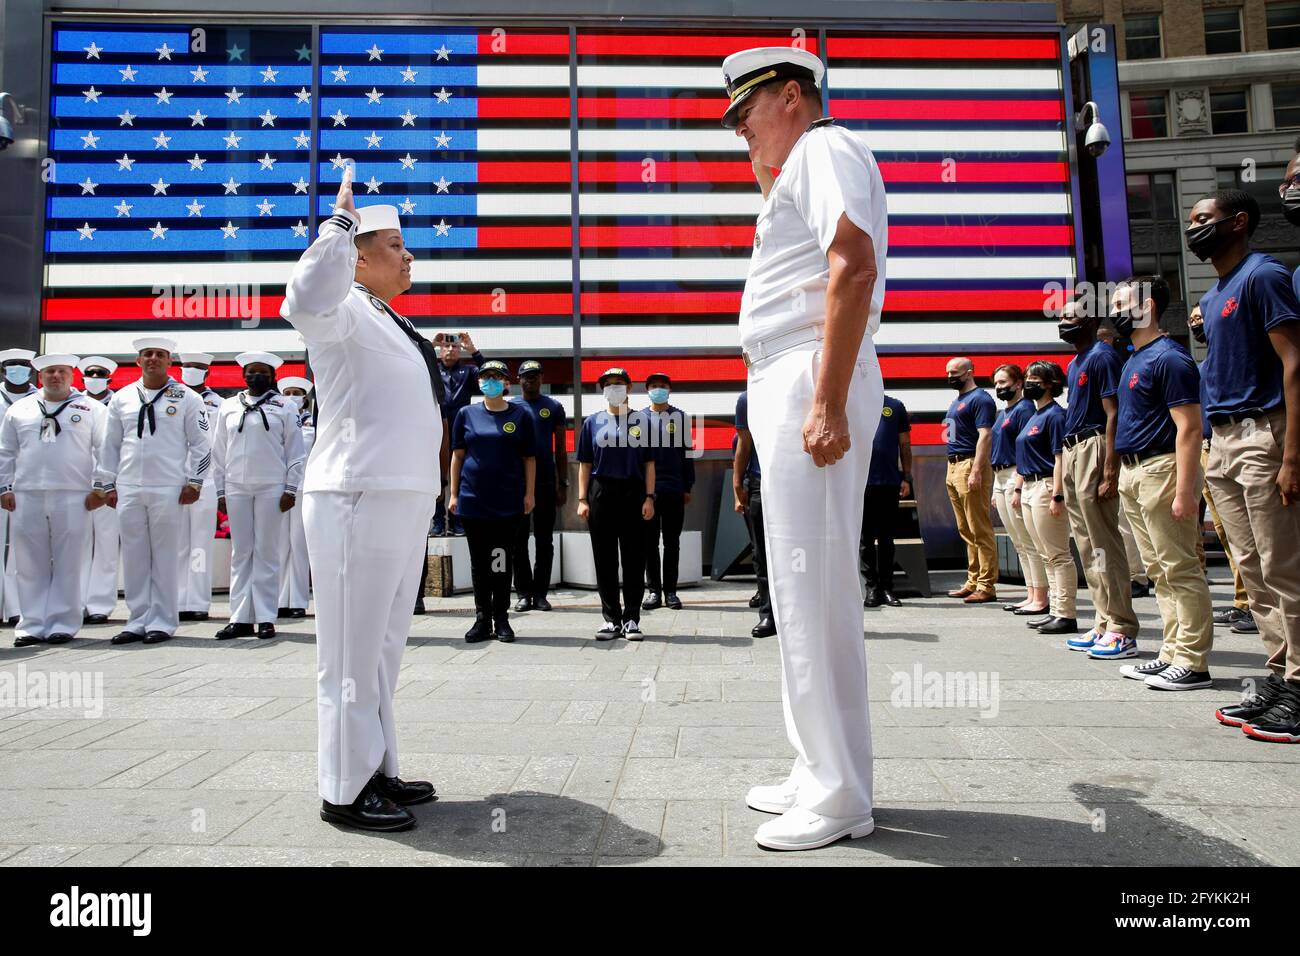 Rear Adm. Charles Rock, Commander, Navy Region Mid-Atlantic gives the oath of enlistment to Aviation Ordnanceman First Class Jessi Arnold, who re-enlisted in the Navy, in Times Square during the annual Fleet Week in New York City, U.S., May 28, 2021. REUTERS/Brendan McDermid Stock Photo